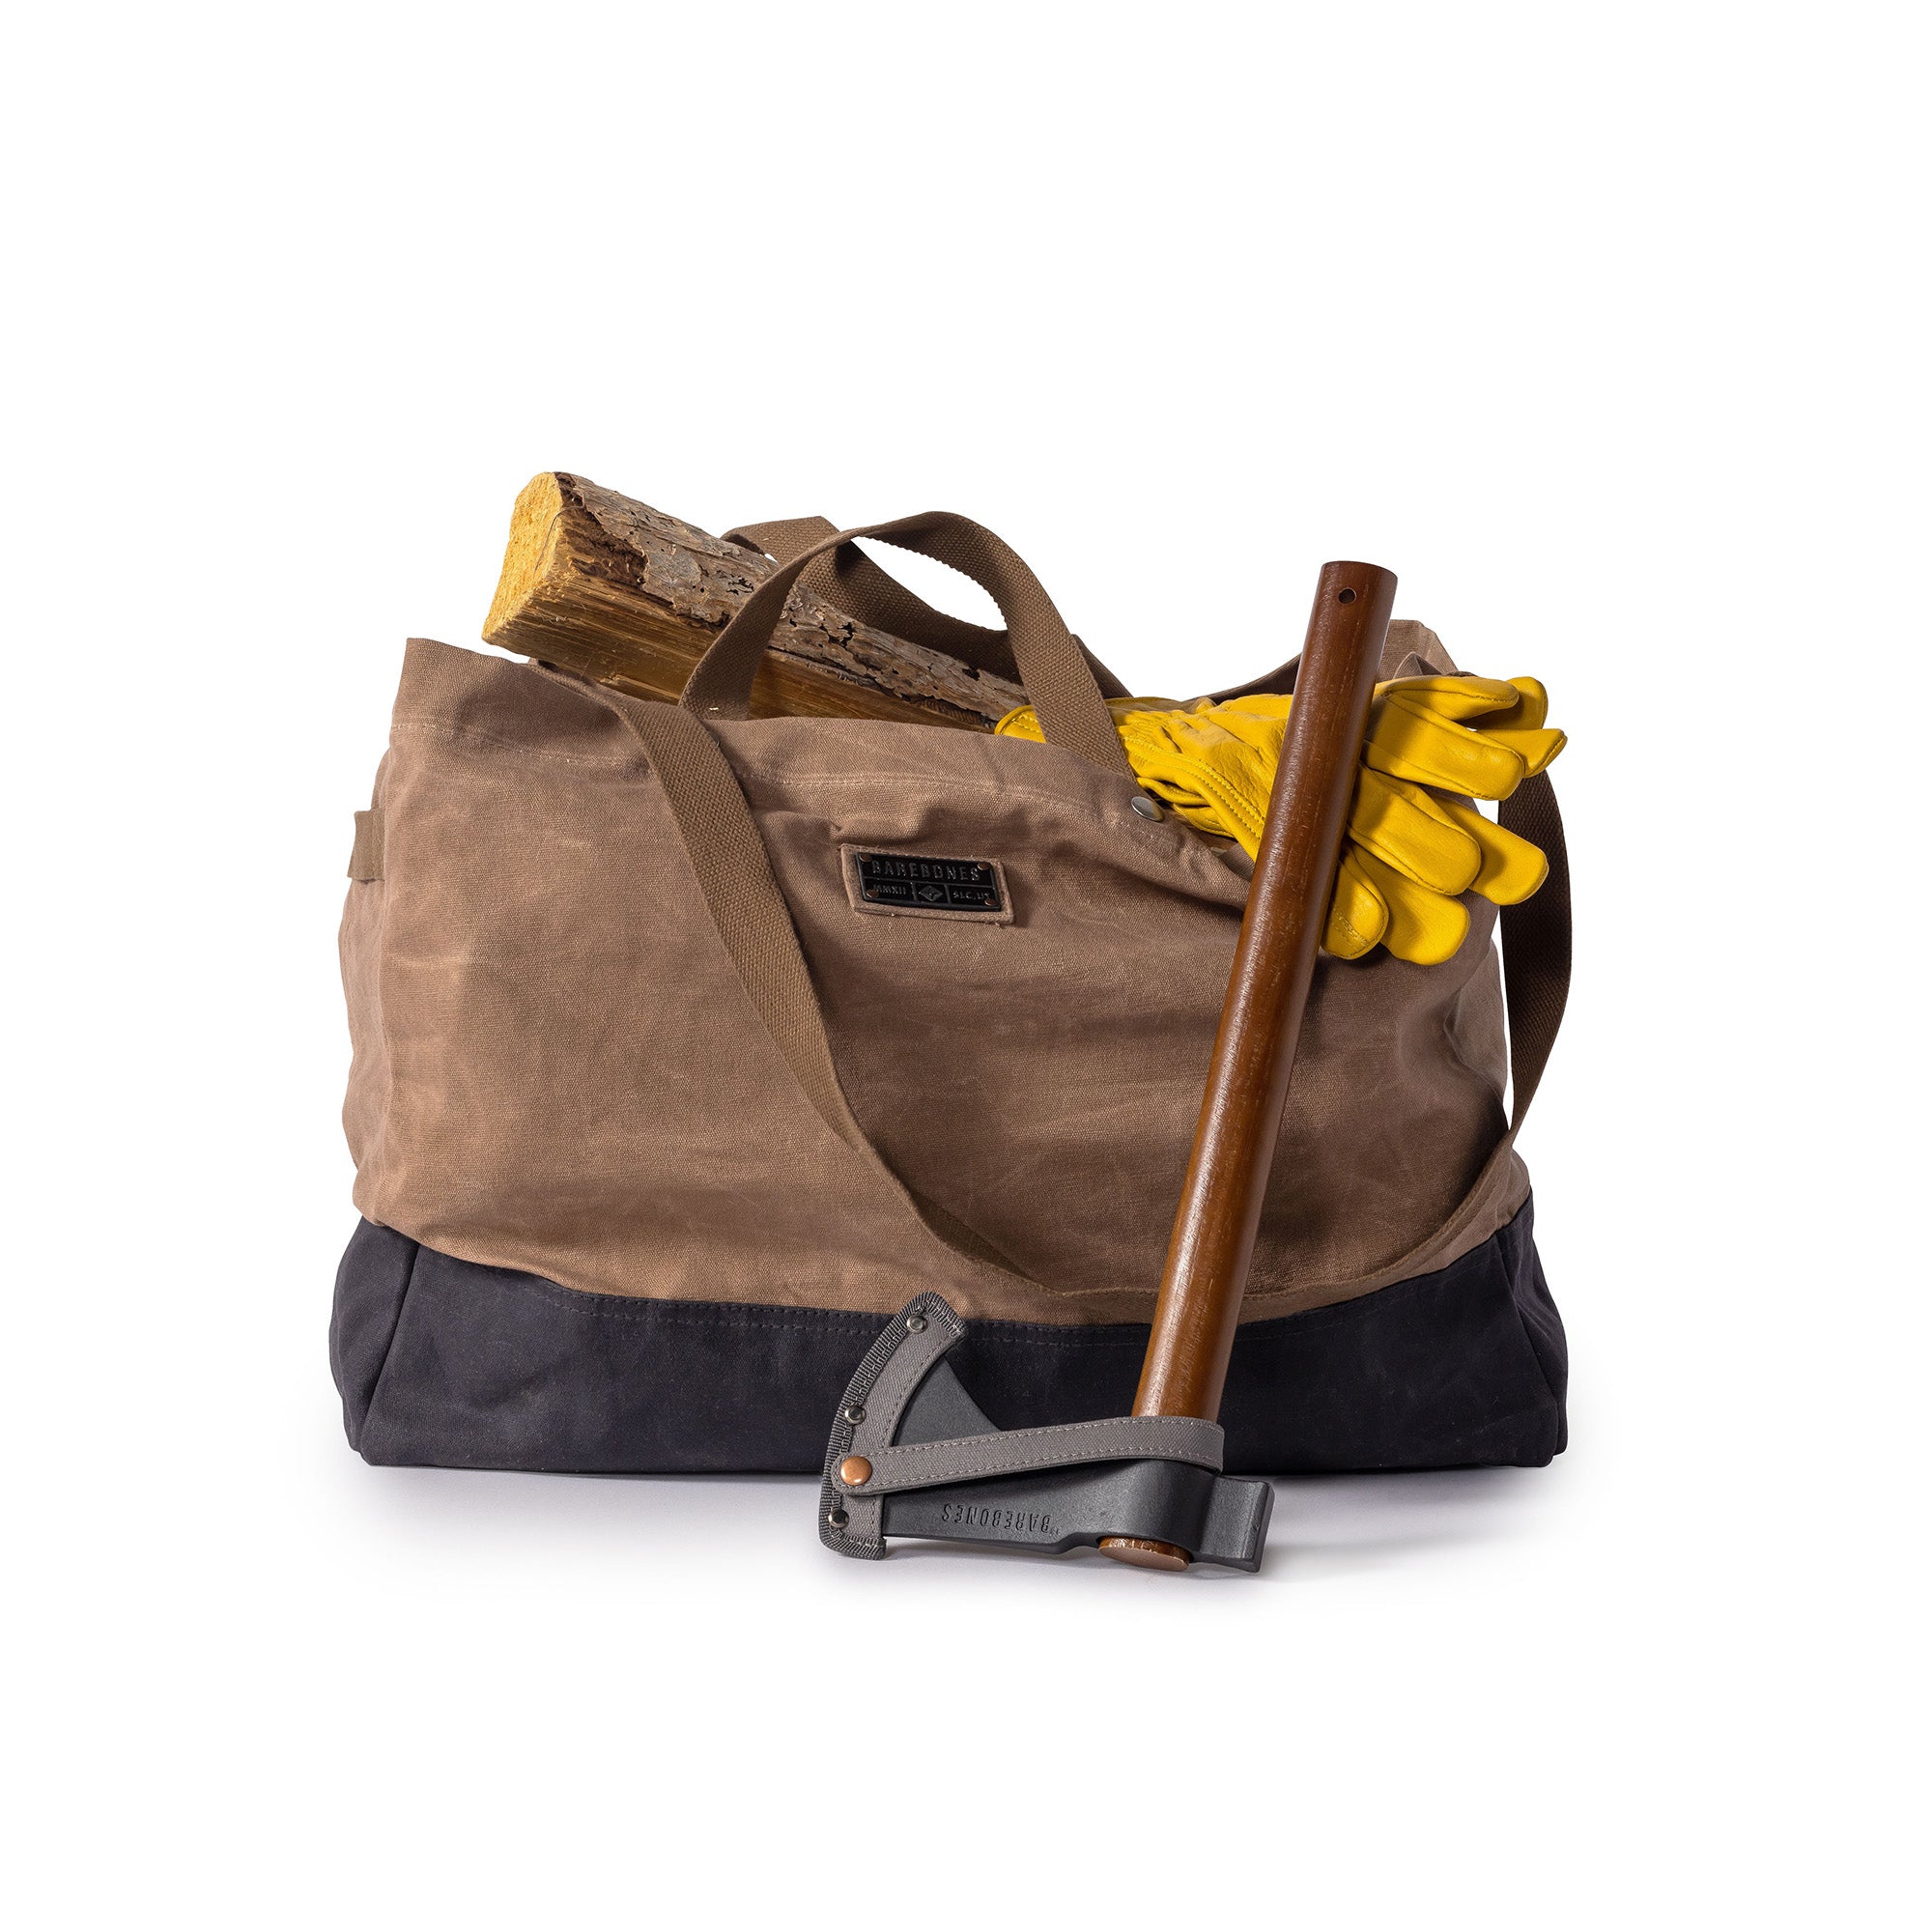 FIREWOOD CARRIER TOTE